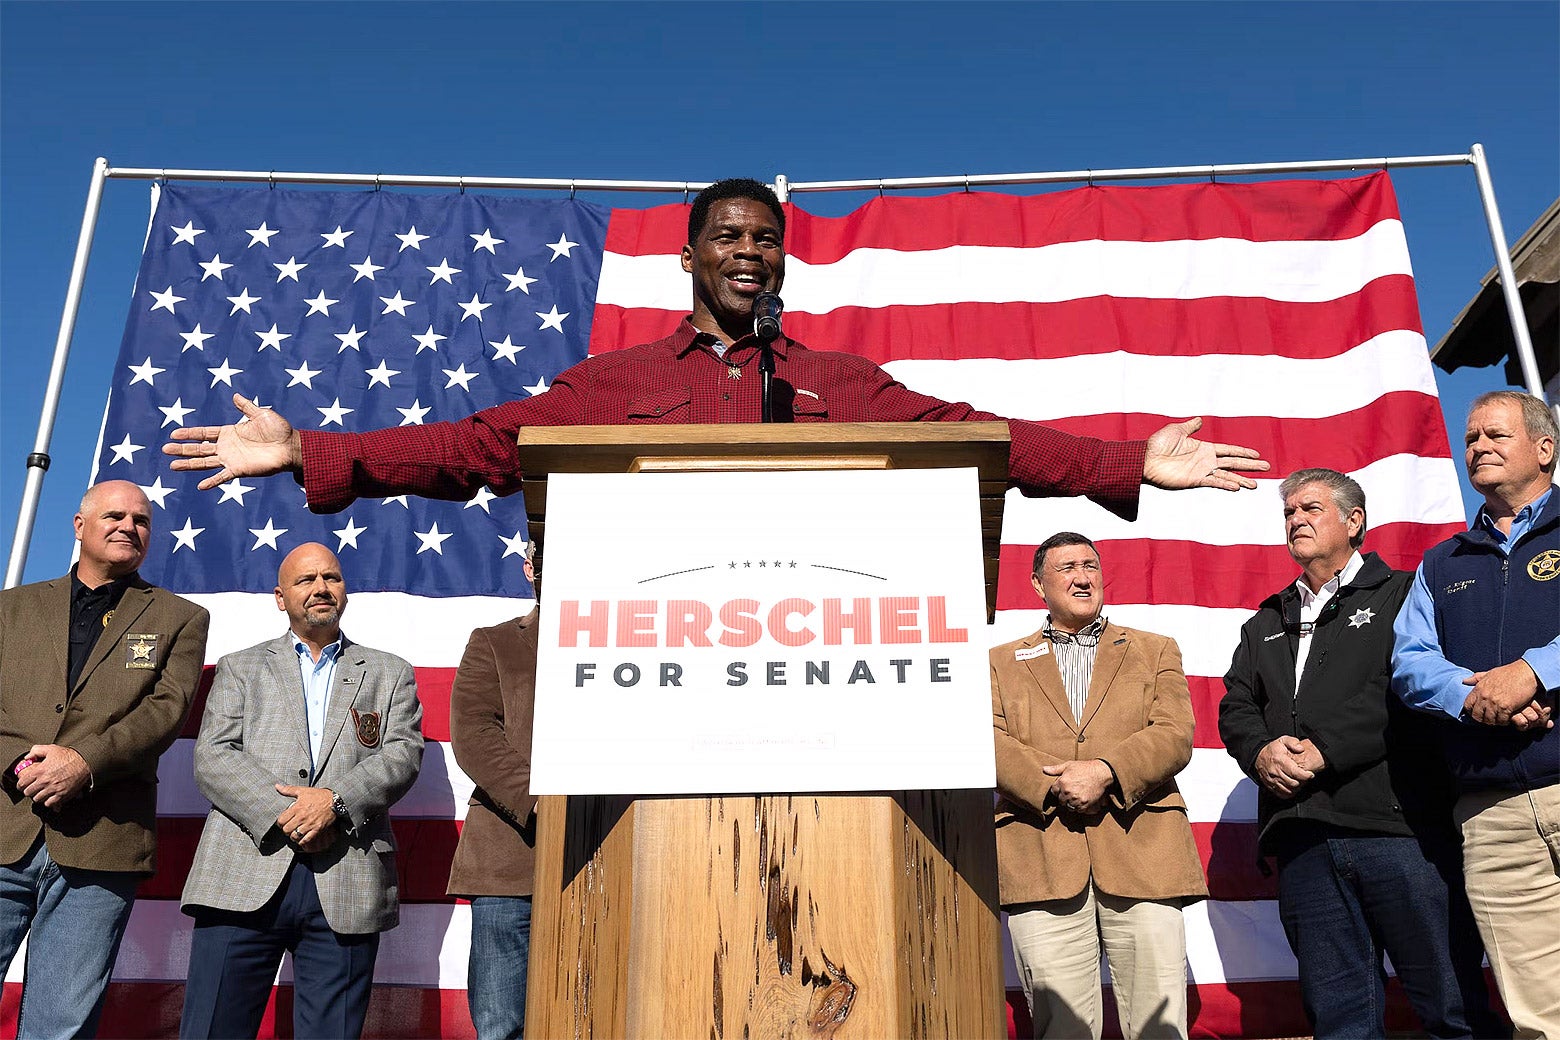 Georgia Republican Senate nominee Herschel Walker addresses the crowd during a campaign stop on Oct. 20 in Macon, Georgia. He has his arms wide open in front of an American flag surrounded by several old white men.